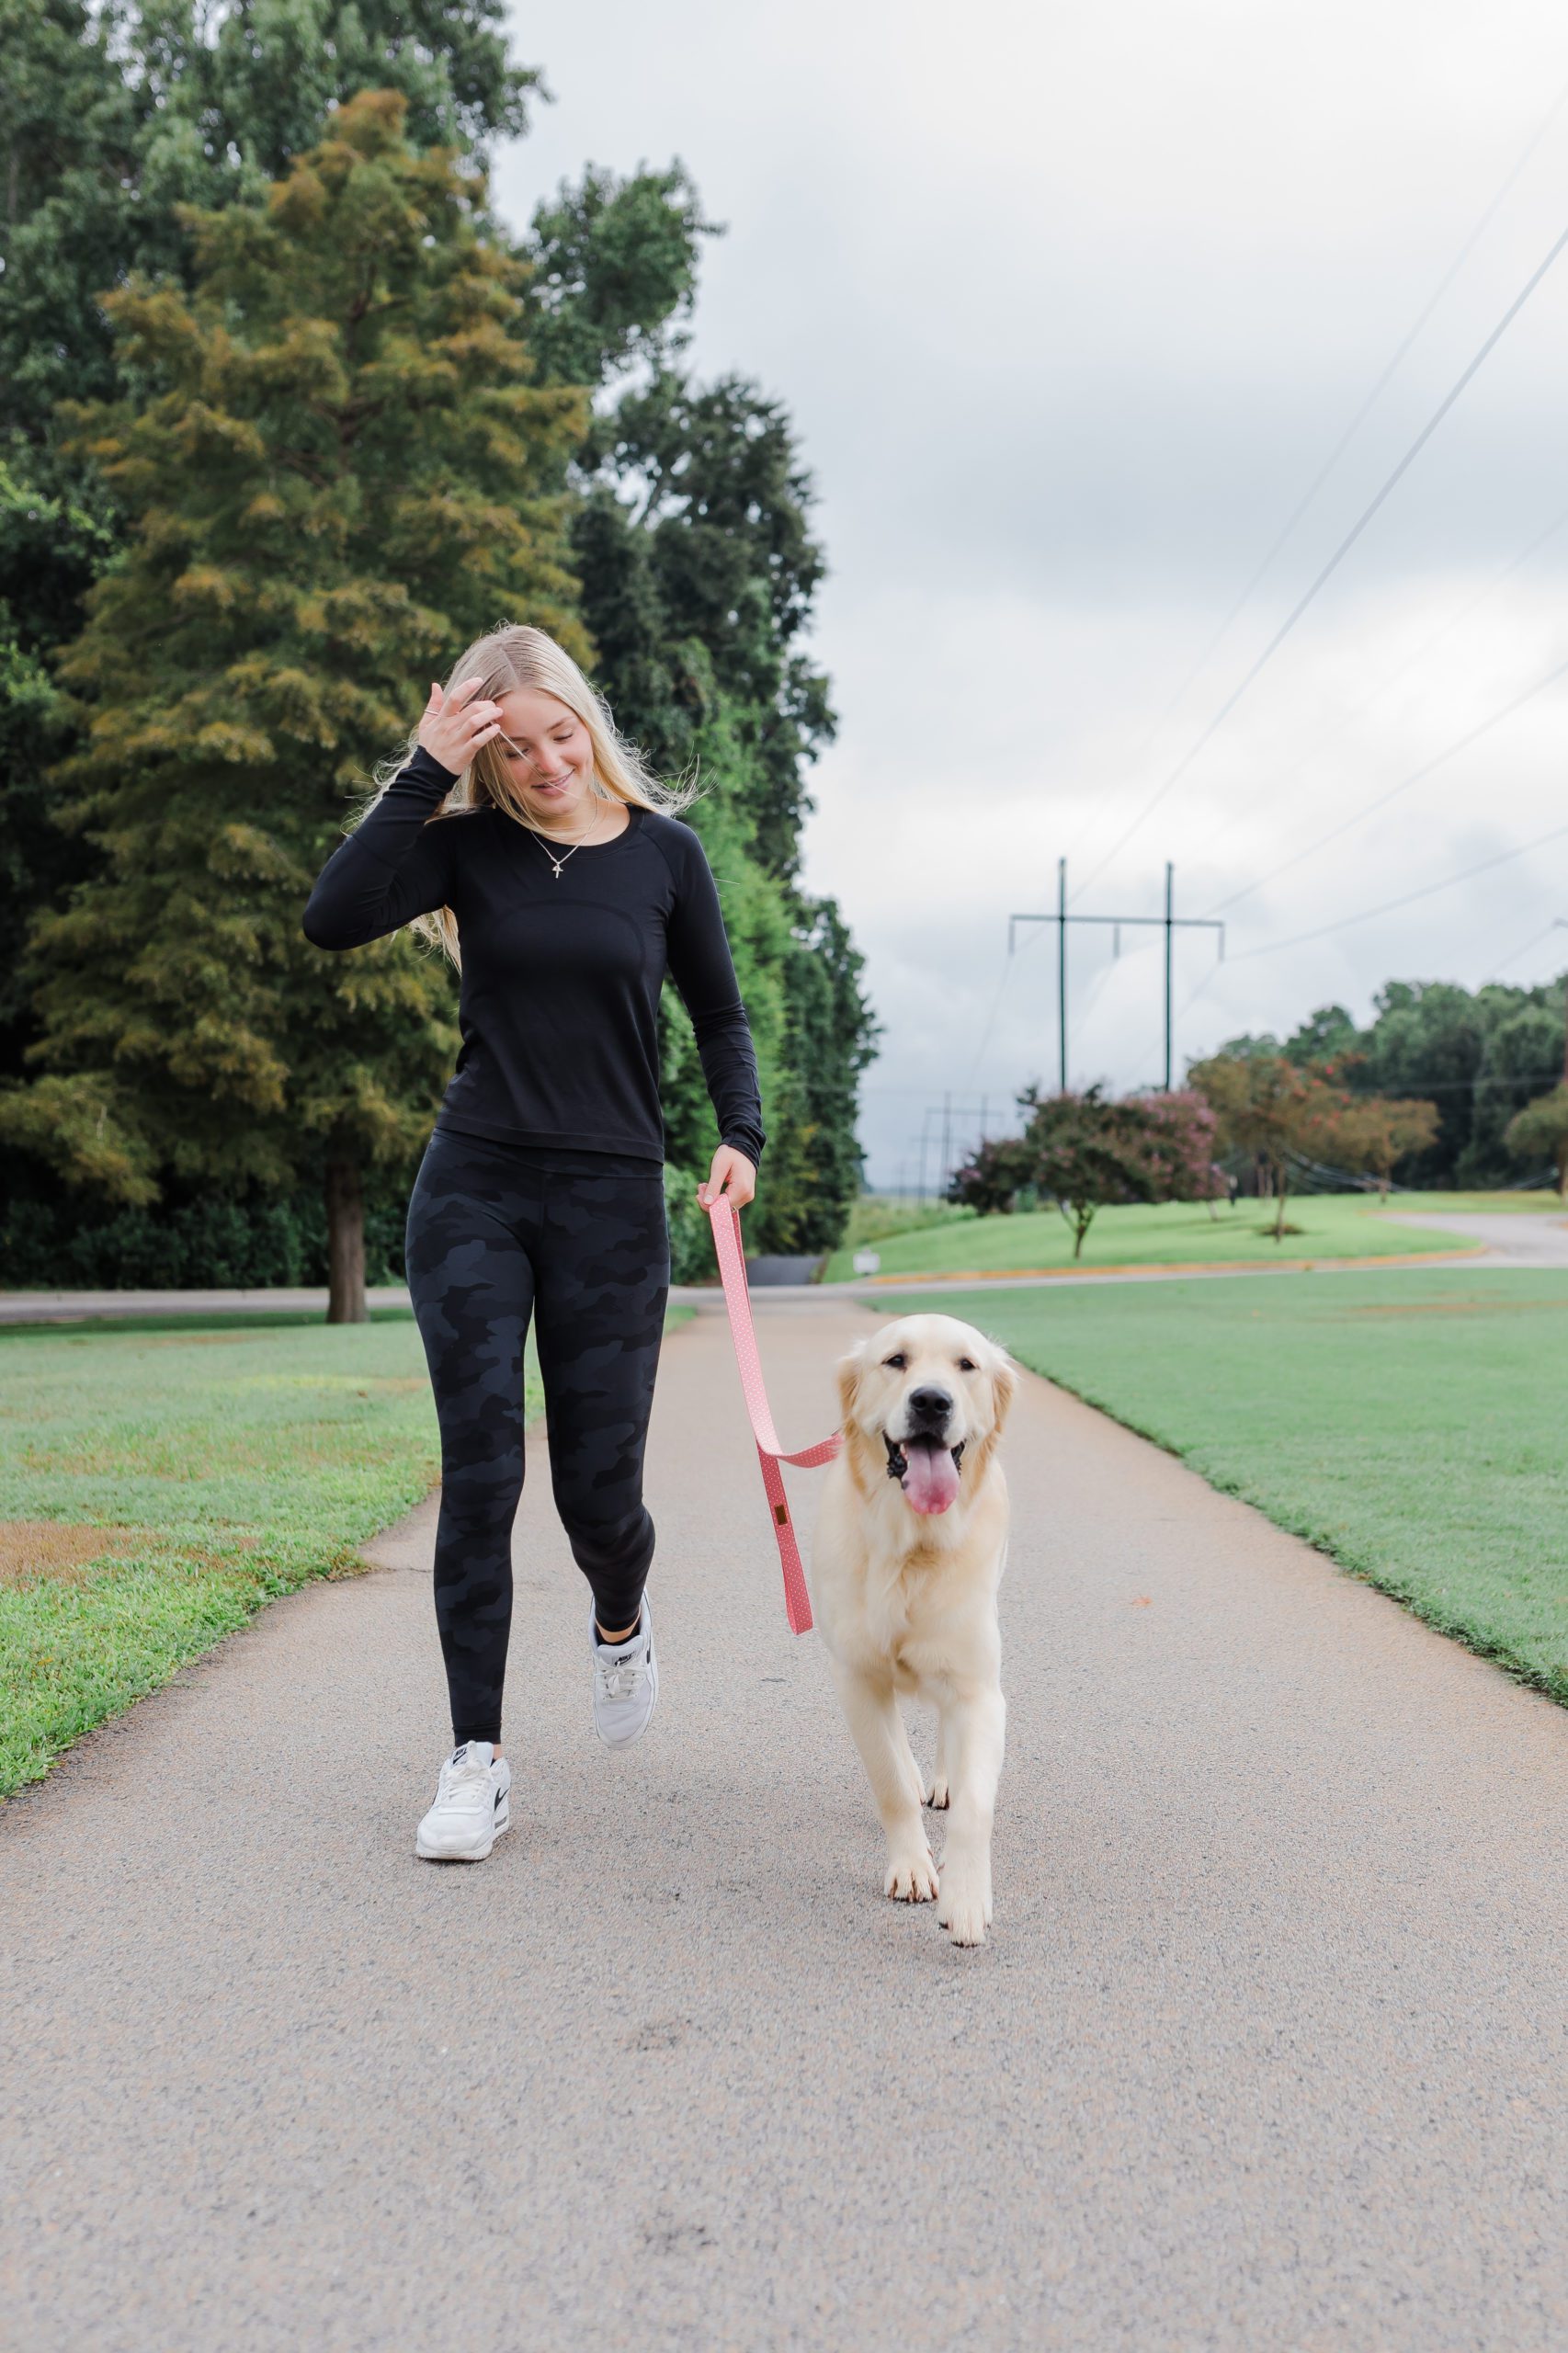 women walking a dog in a park on a path for branding photography for Puddle Jumper Pups